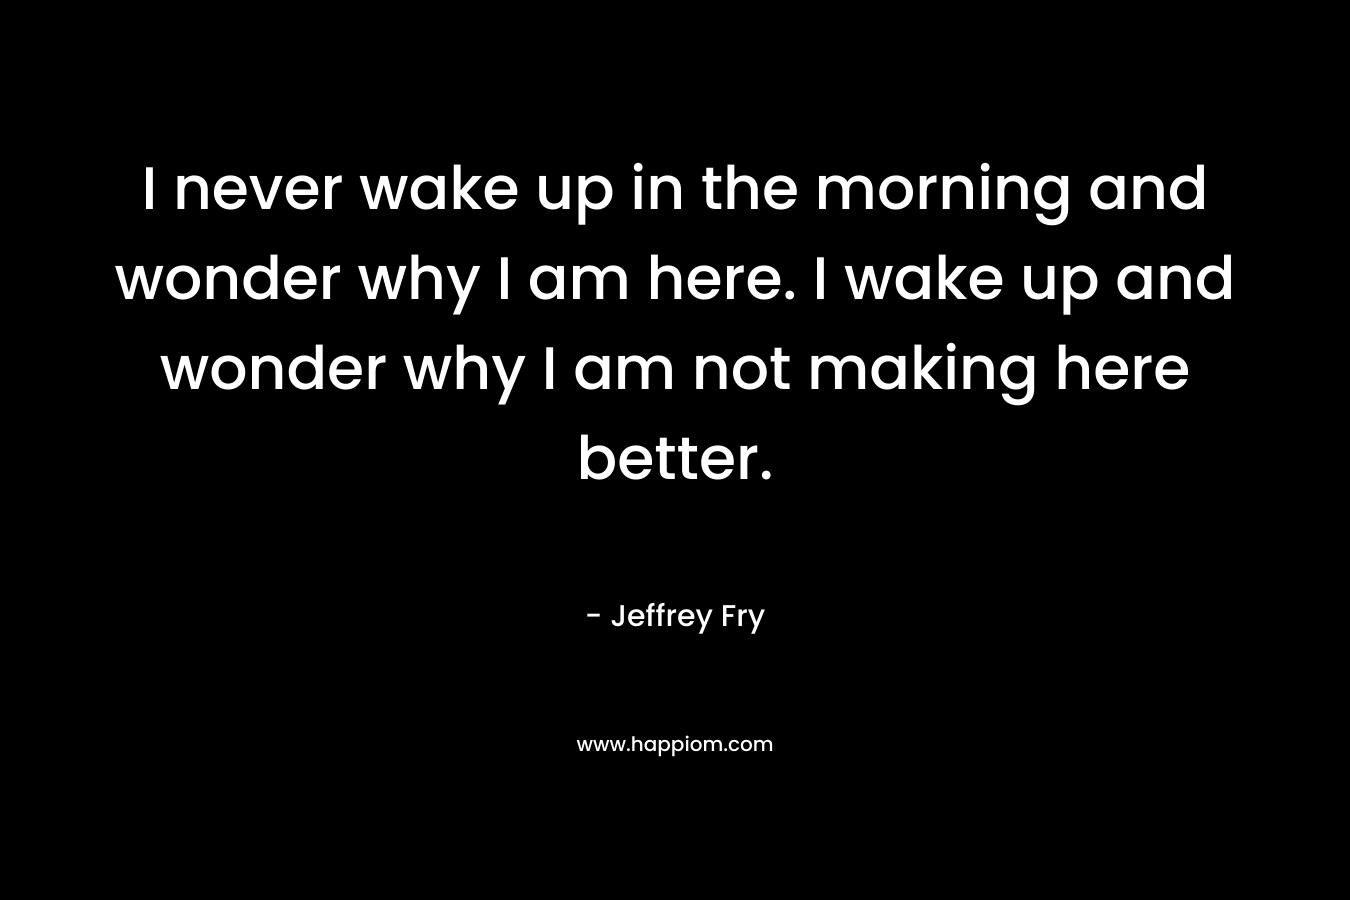 I never wake up in the morning and wonder why I am here. I wake up and wonder why I am not making here better. – Jeffrey Fry